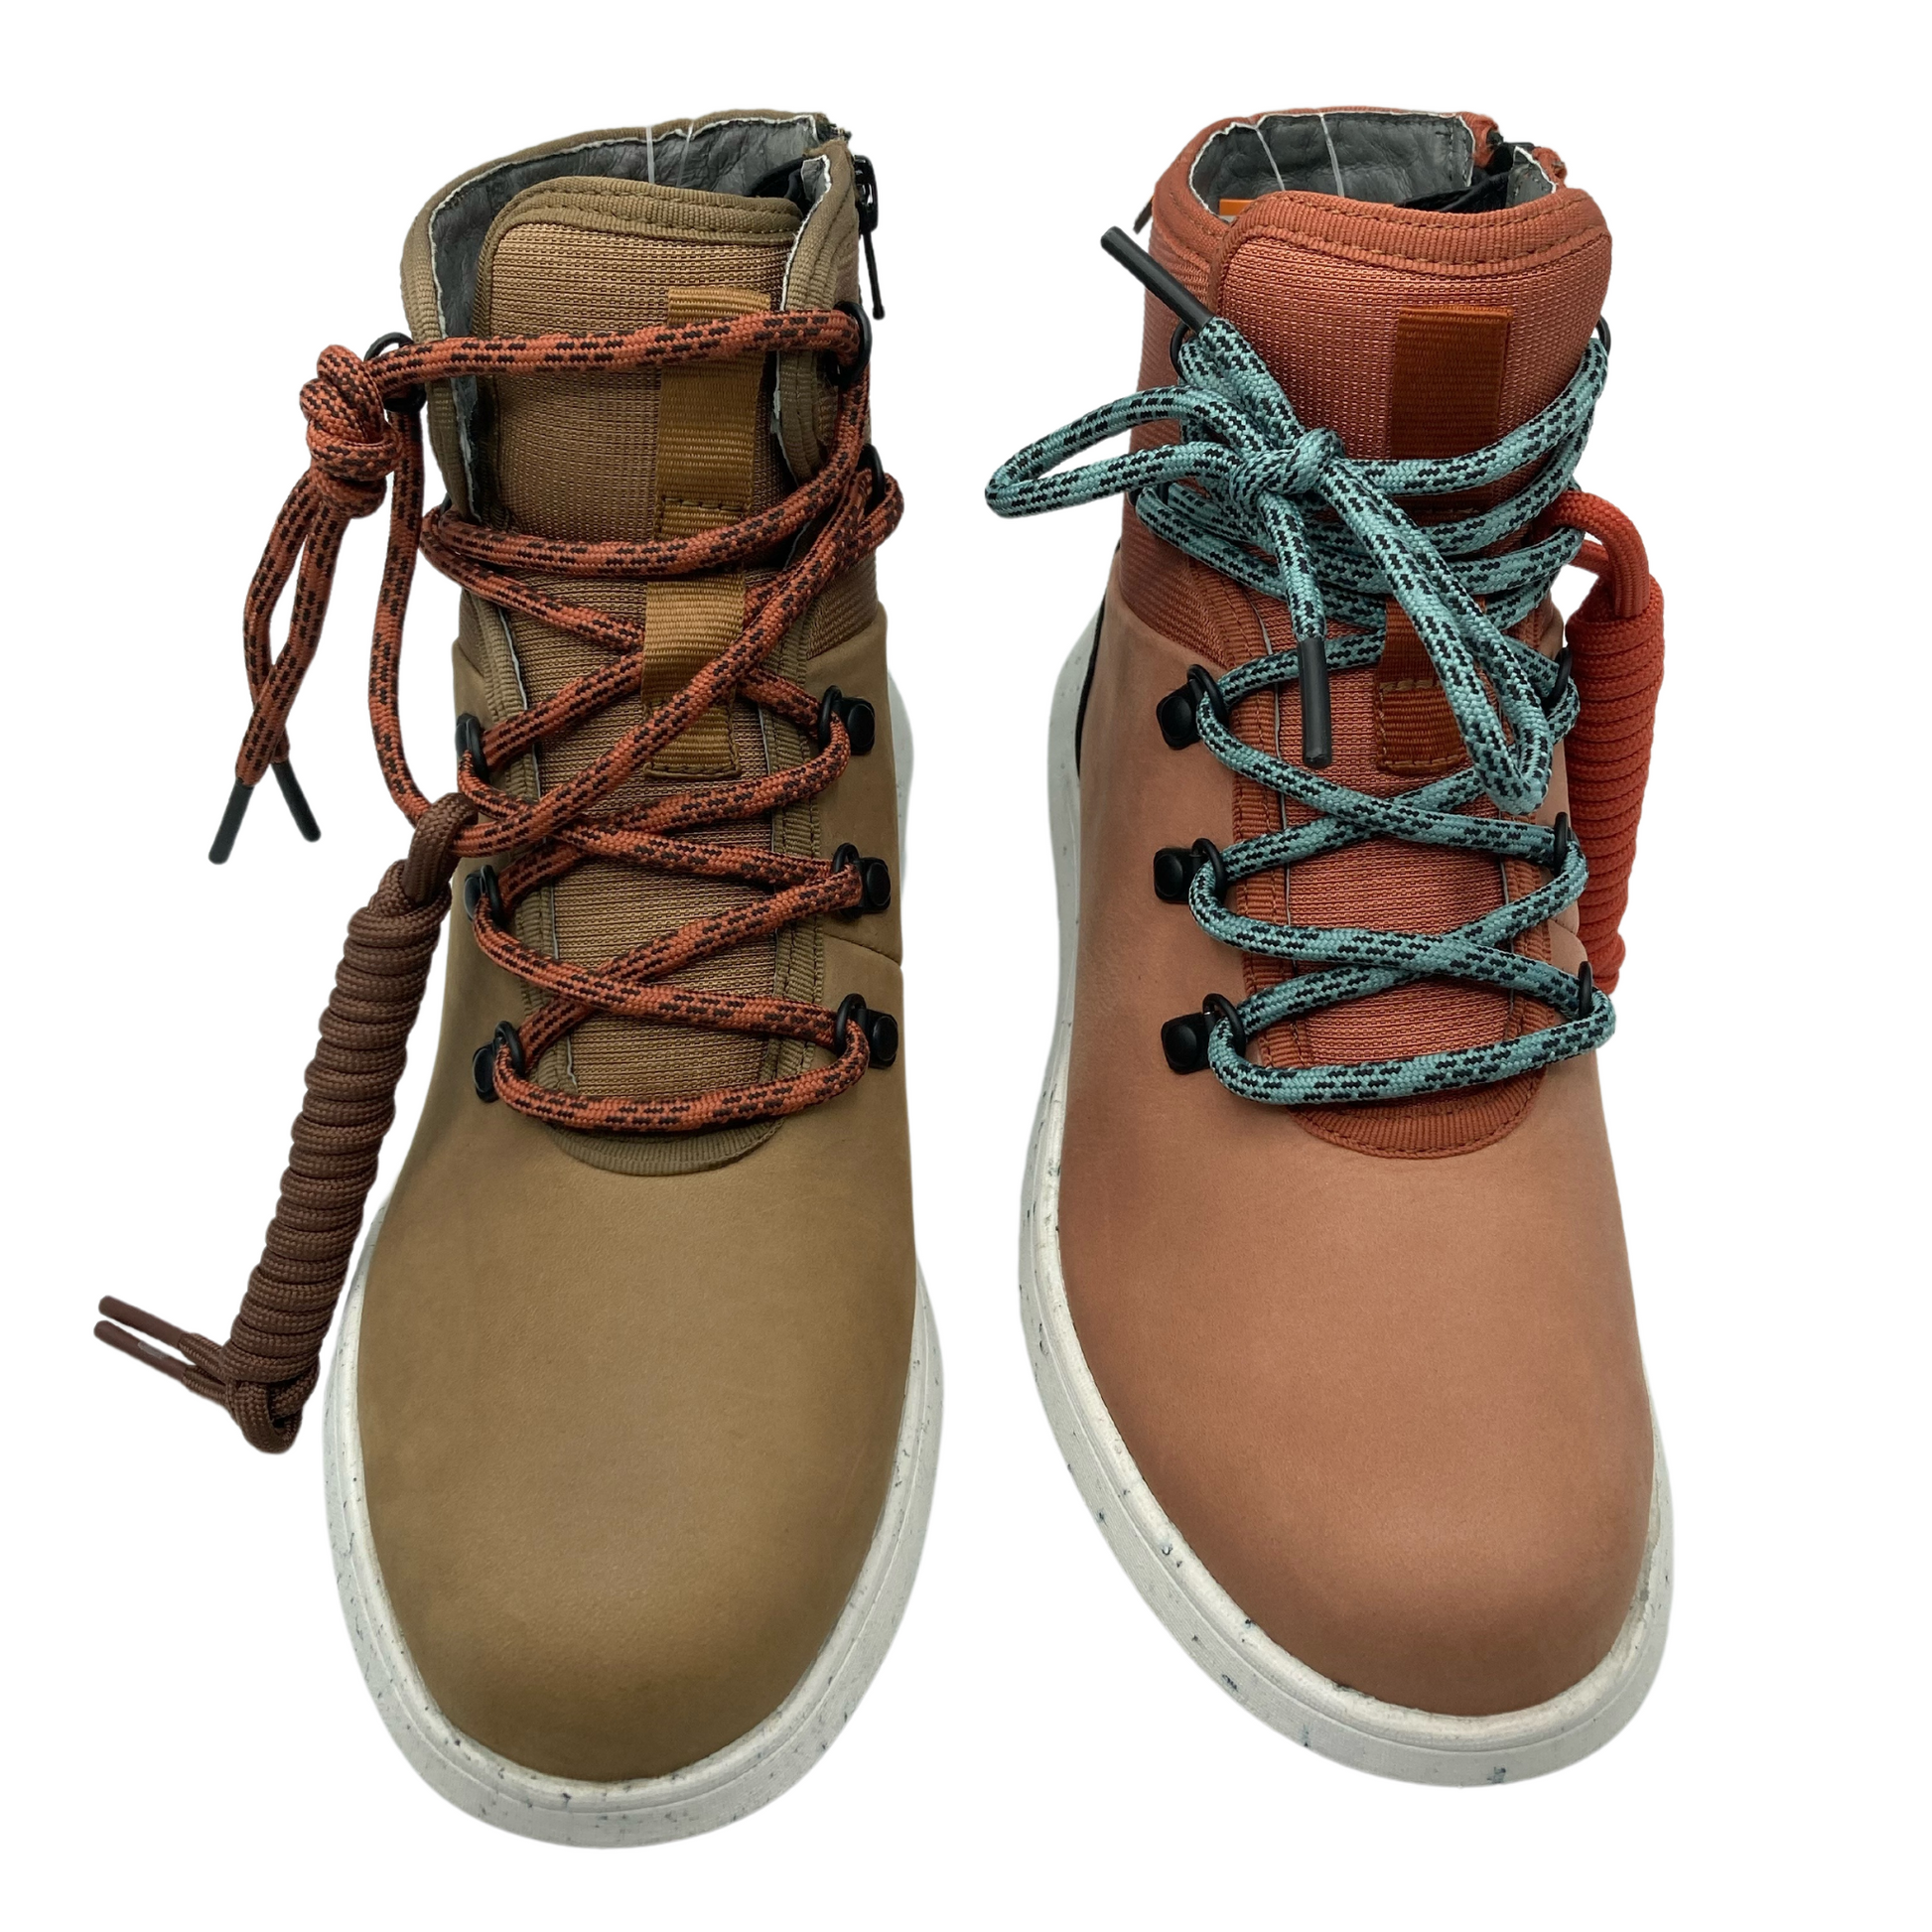 Top view of a pair of hiking boots, one light brown and one light orange. Both have white outsoles